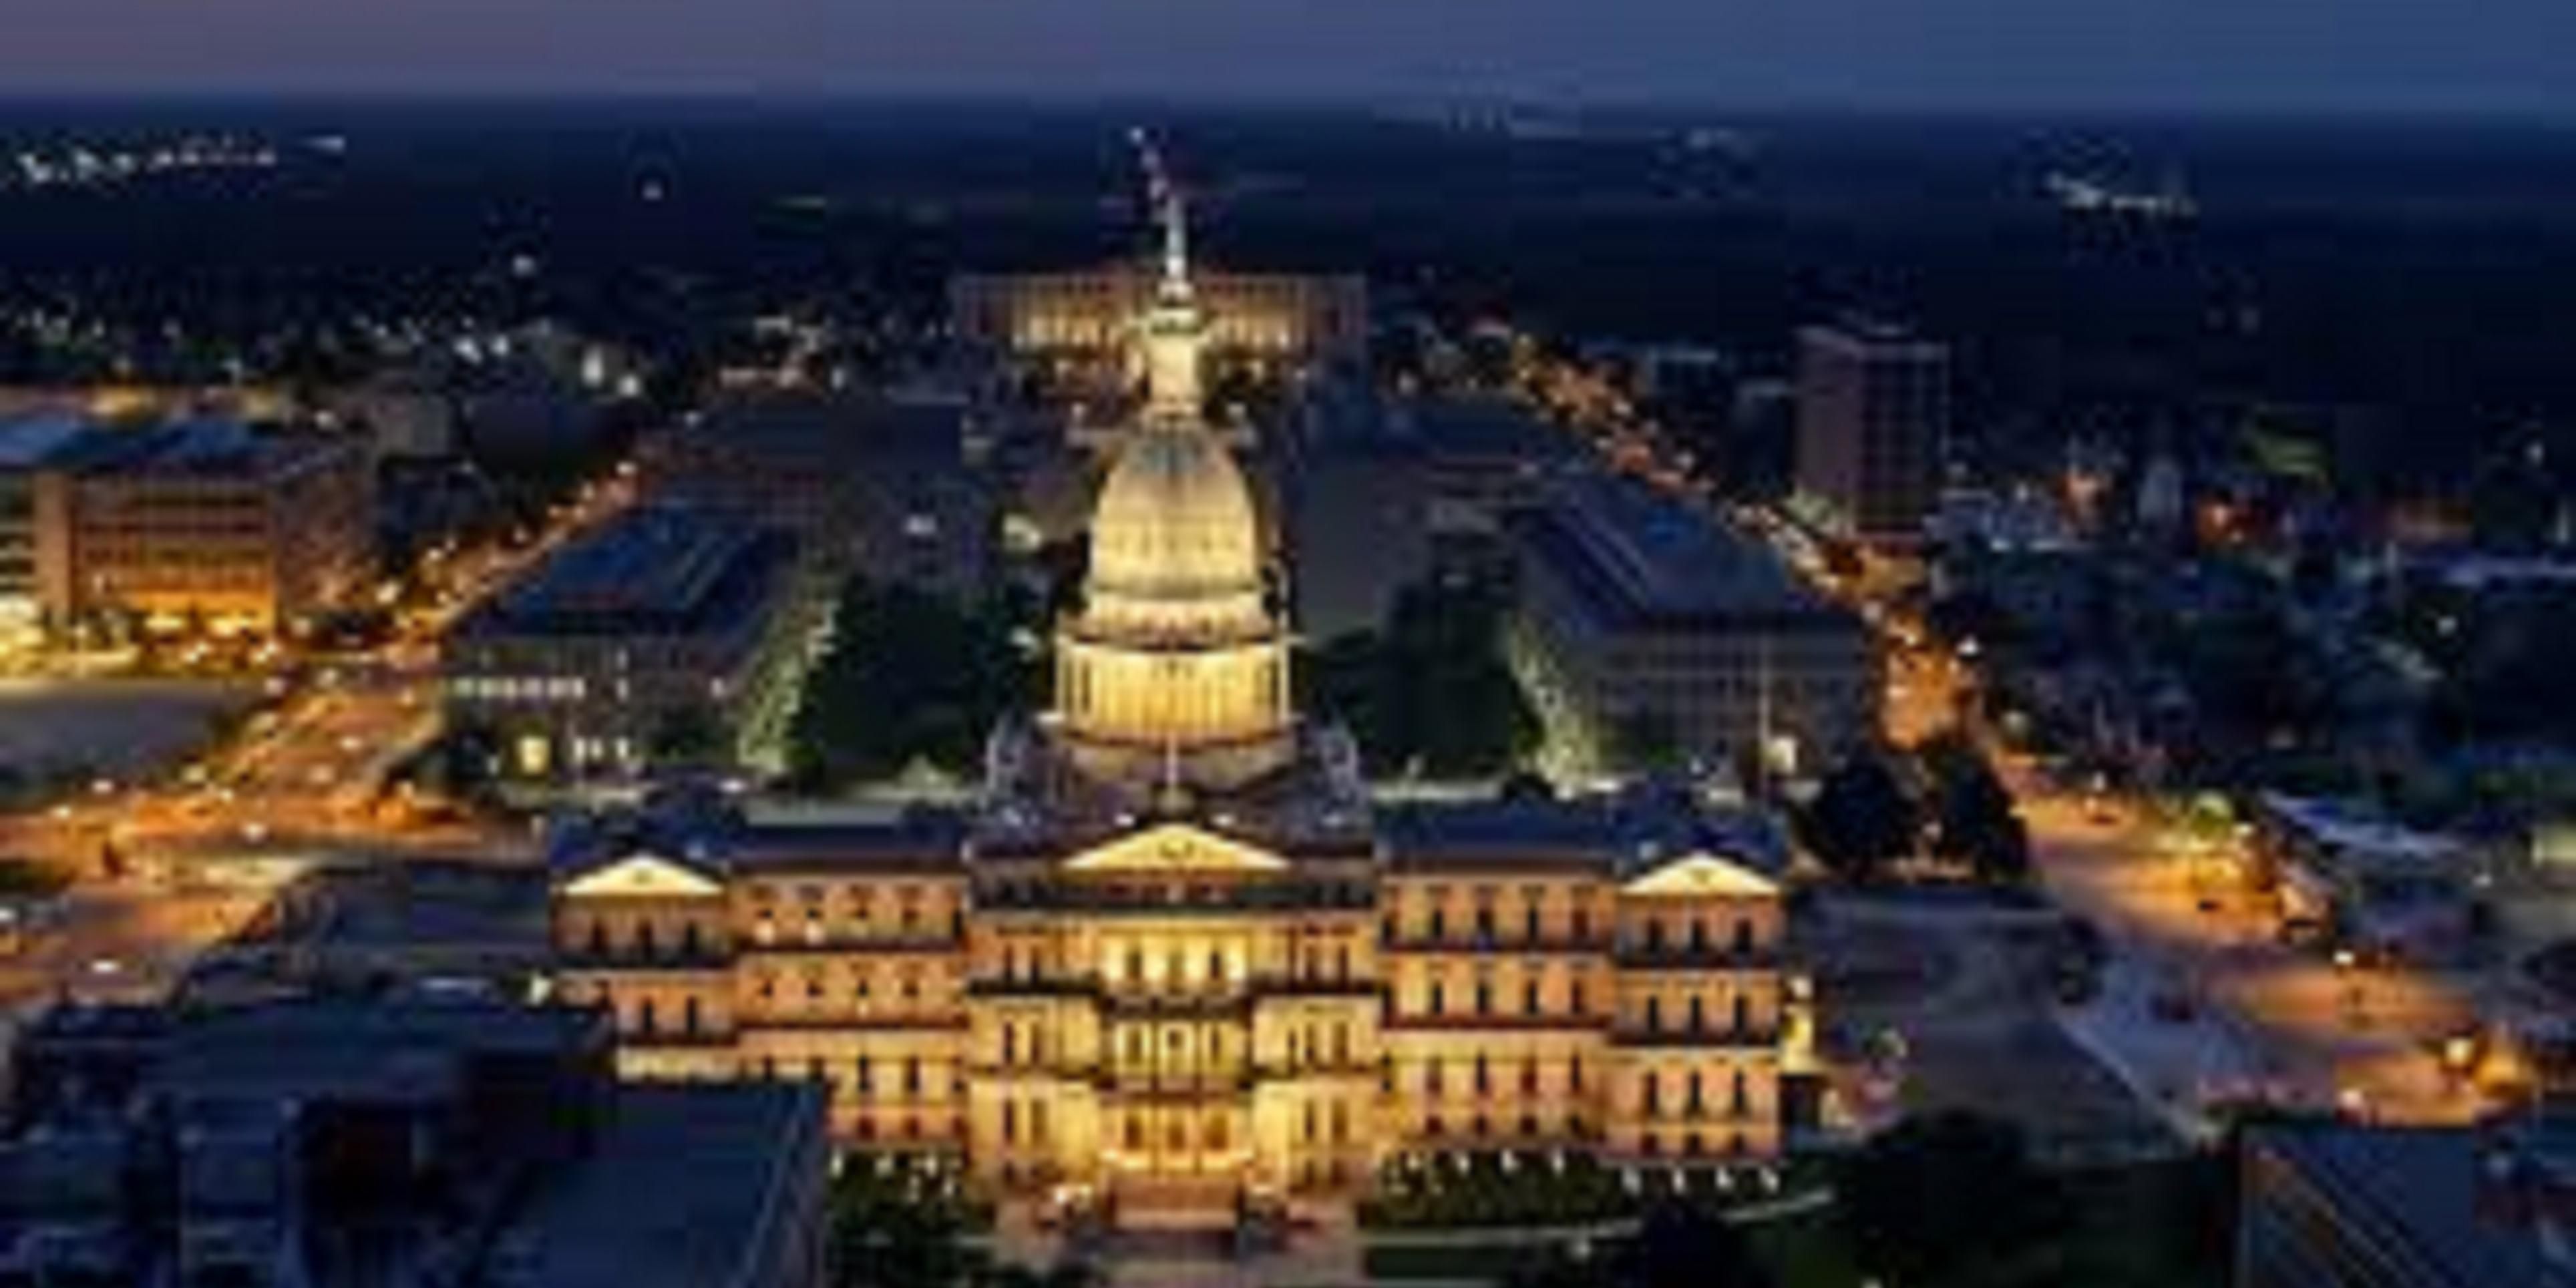 We are located a short drive from Downtown Lansing. You can visit the Michigan State Capitol, Michigan History Center, Impression 5 Science Center, events at the Lansing Center, and a Lugnuts game!